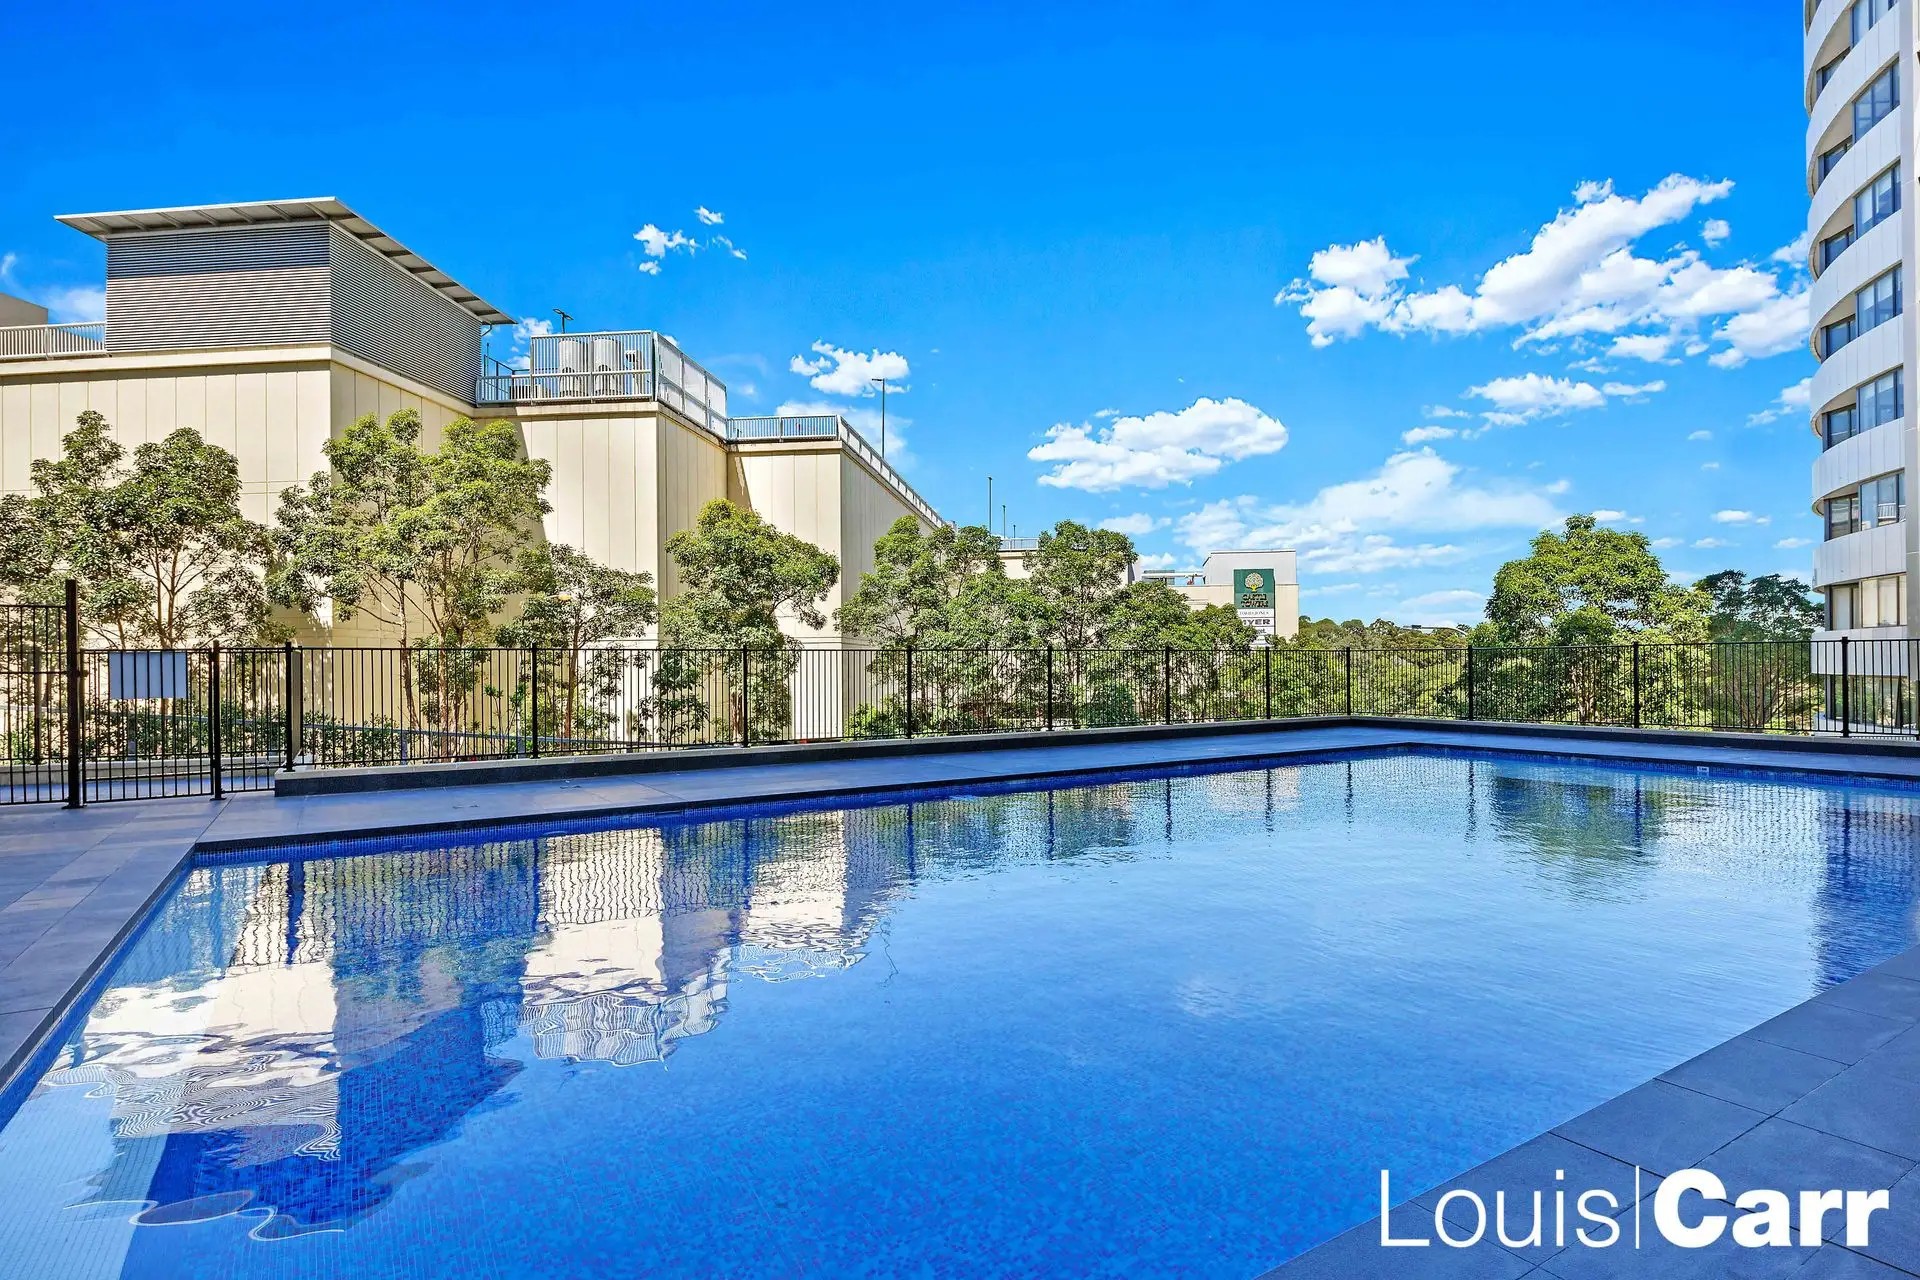 Photo #7: 1107/9 Gay Street, Castle Hill - Sold by Louis Carr Real Estate